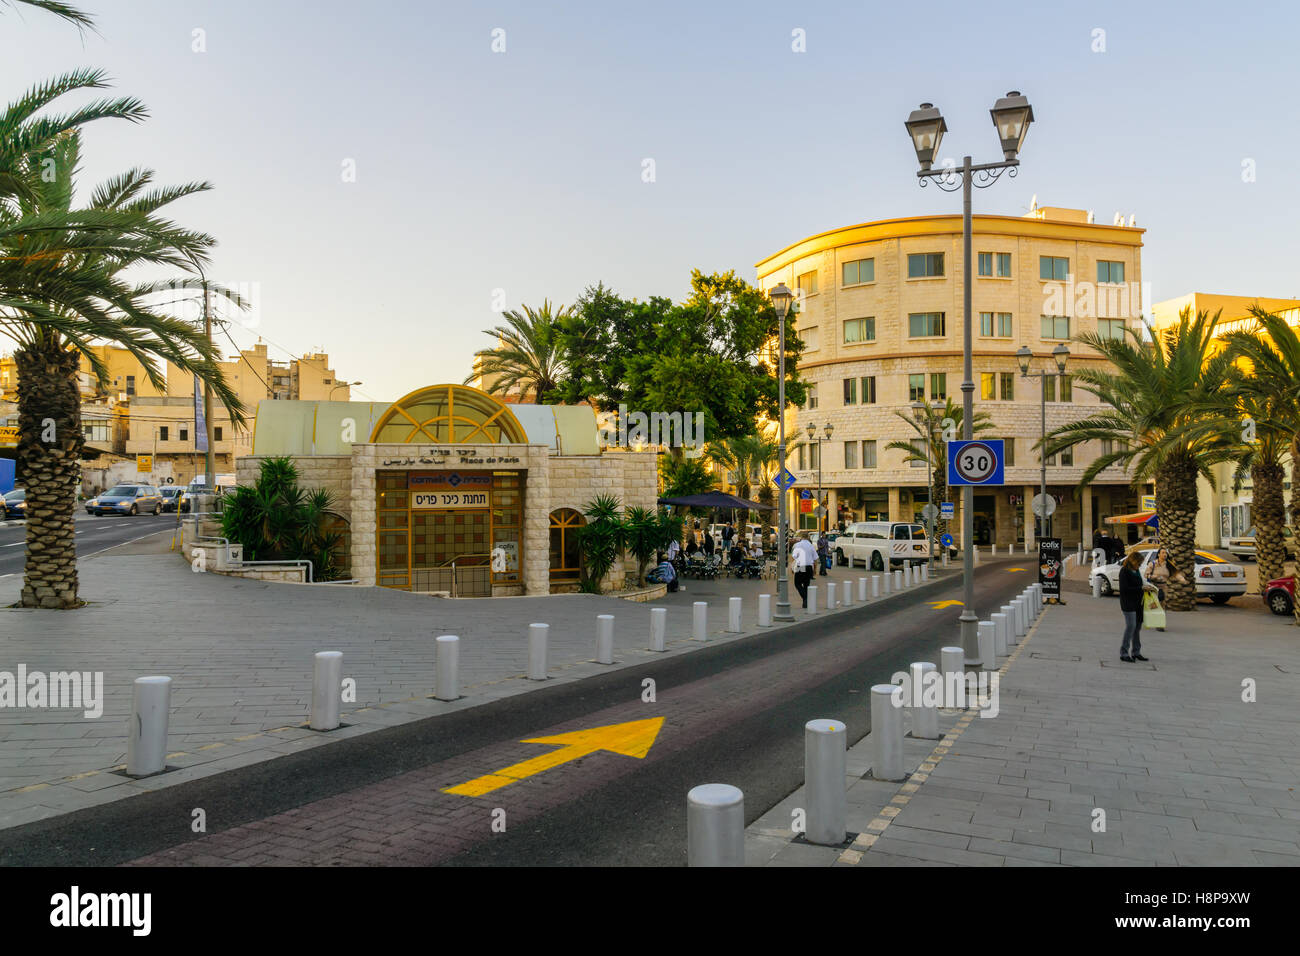 HAIFA, ISRAEL - DECEMBER 08, 2015: Scene of Paris square, and its subway (Carmelit) station, with locals and tourists. It is one Stock Photo